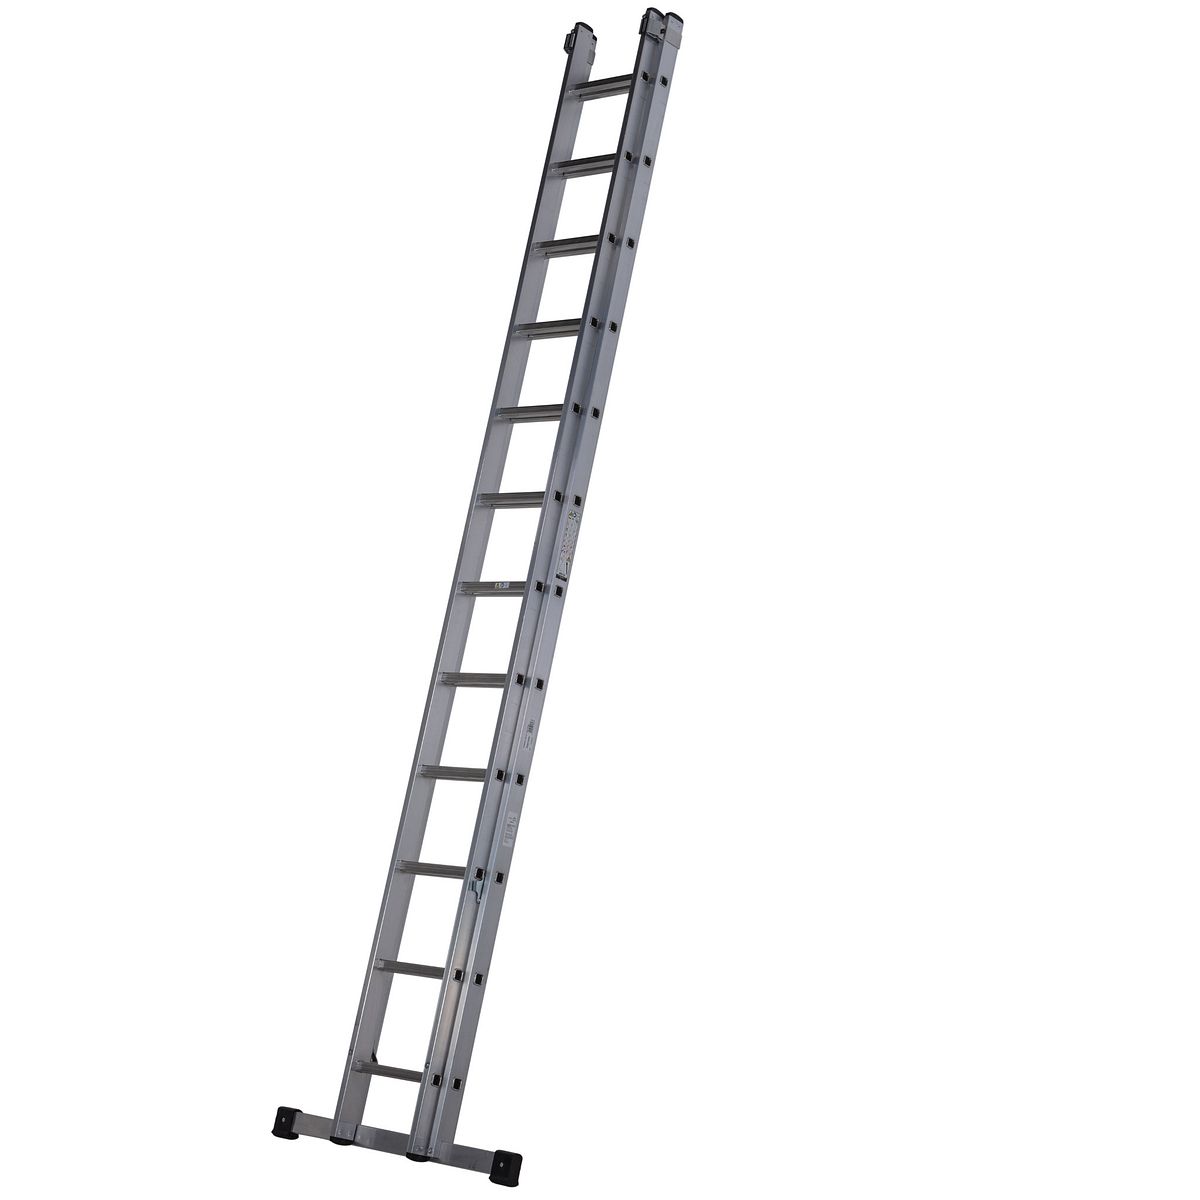 New 4 Sizes Werner 771 Series Aluminium Extending Roof Ladders